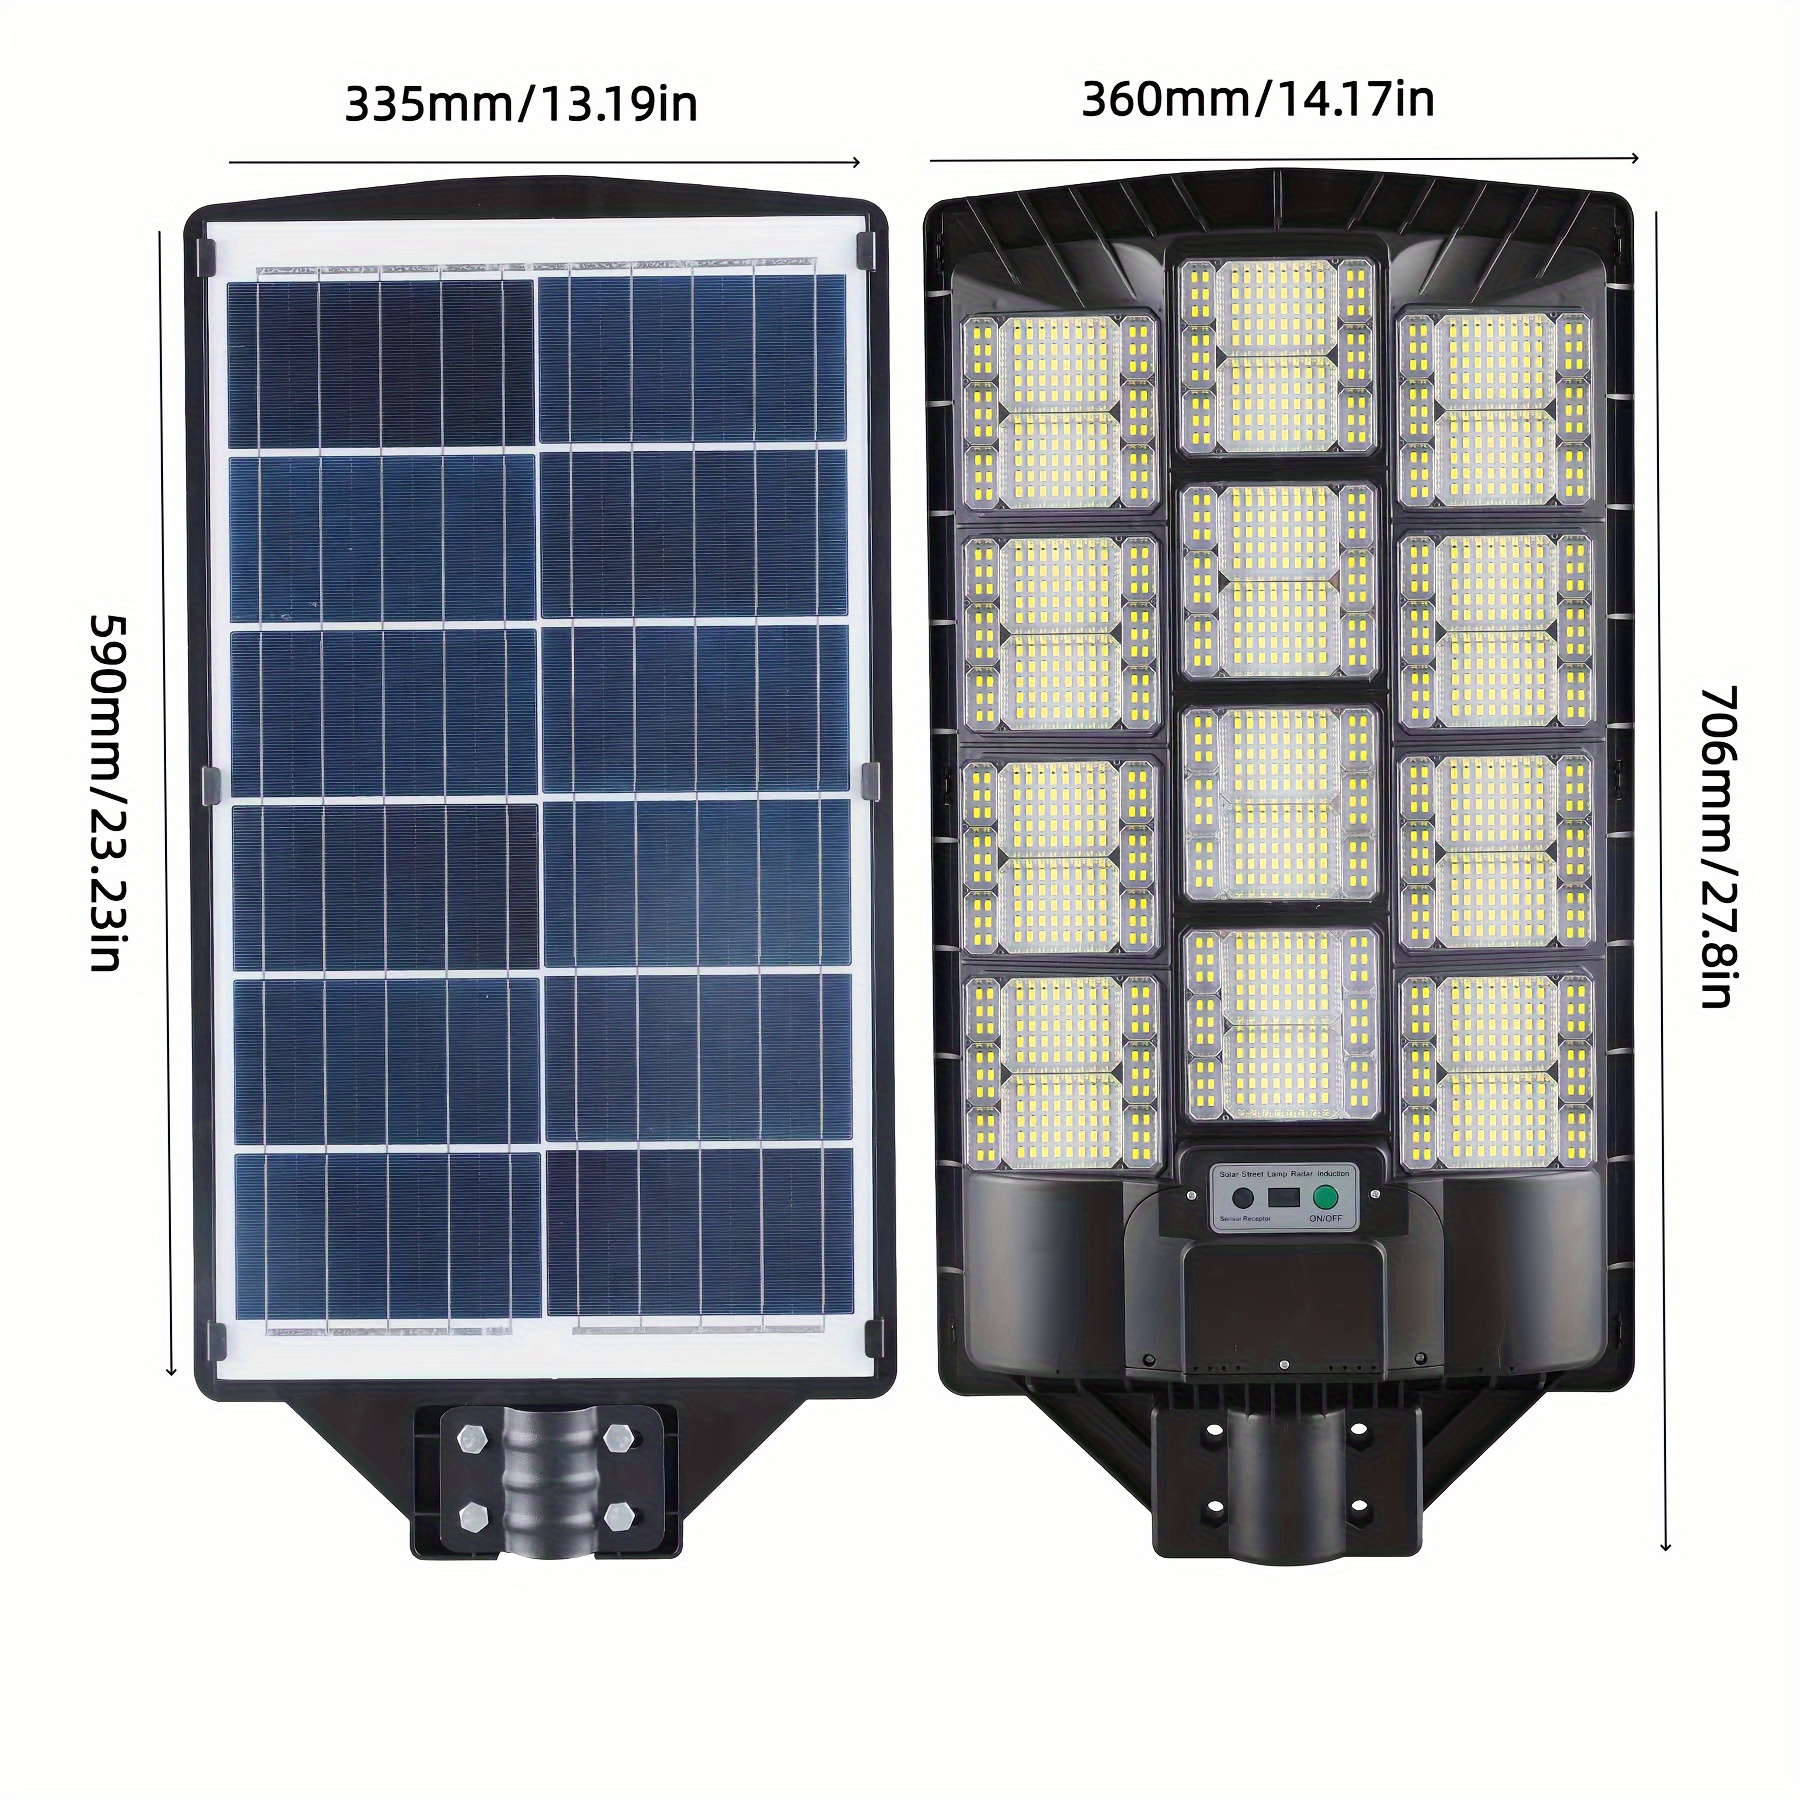 1pc high power integrated solar lamp human body induction light control remote control high brightness led large lamp beads irradiation area up to 300 square meters suitable for courtyards parks roads farms free bracket wall parts package details 9